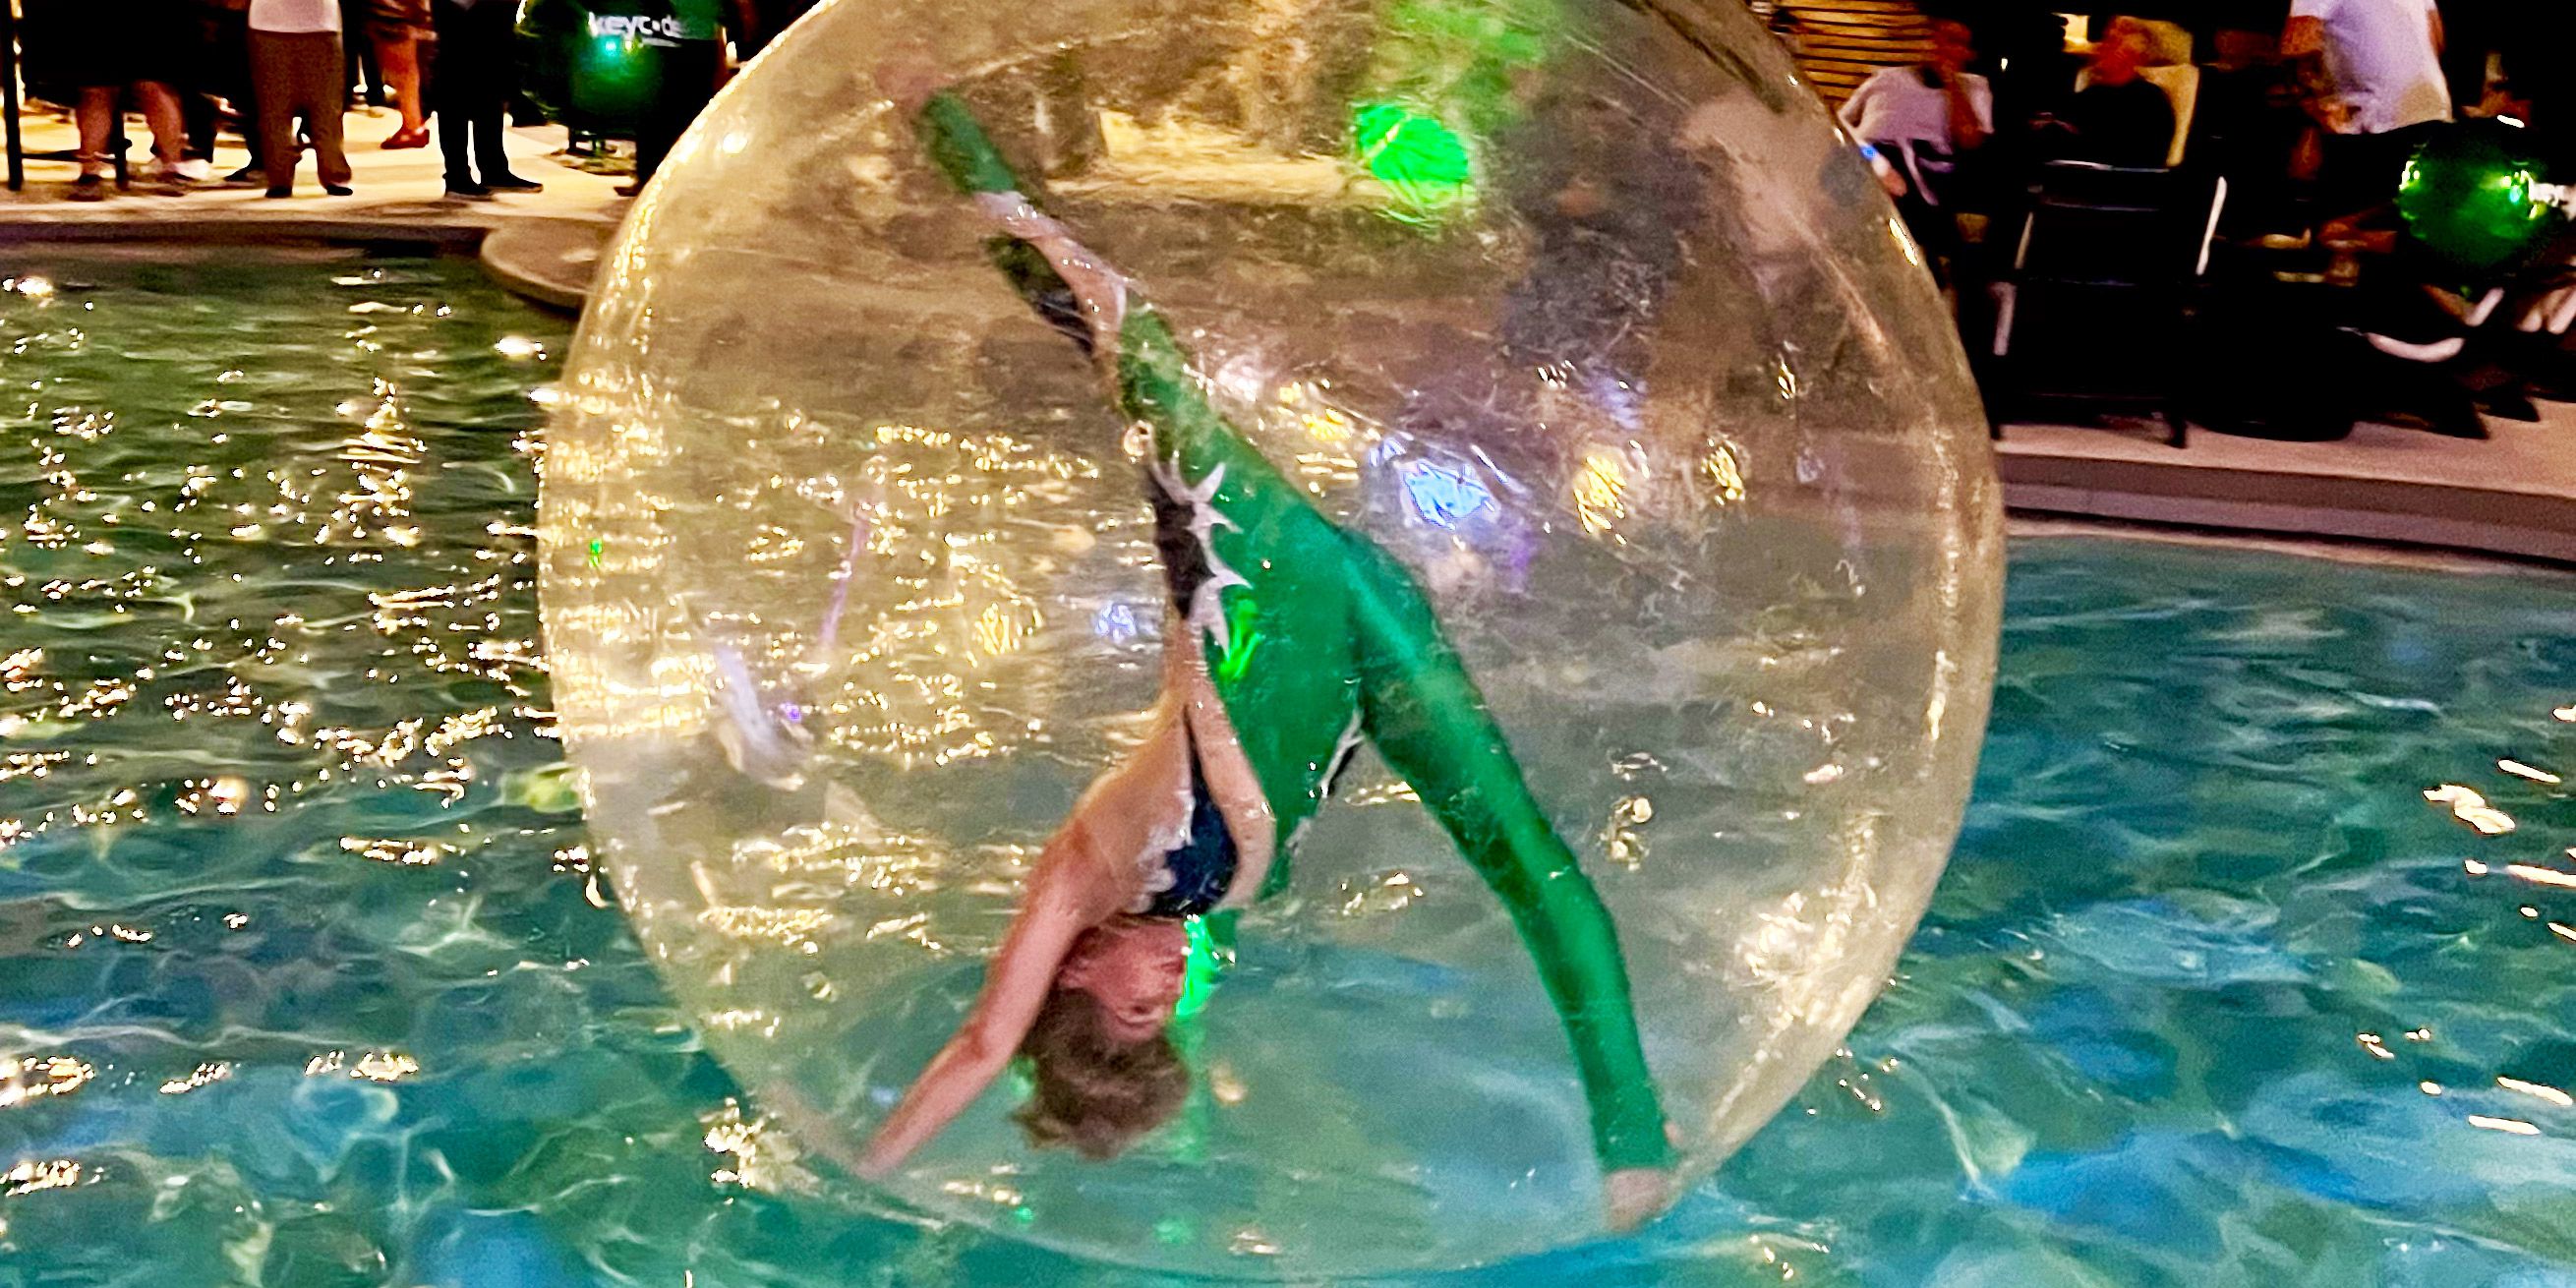 Water Sphere Contortionist Dazzles in Green at Las Vegas Corporate Event